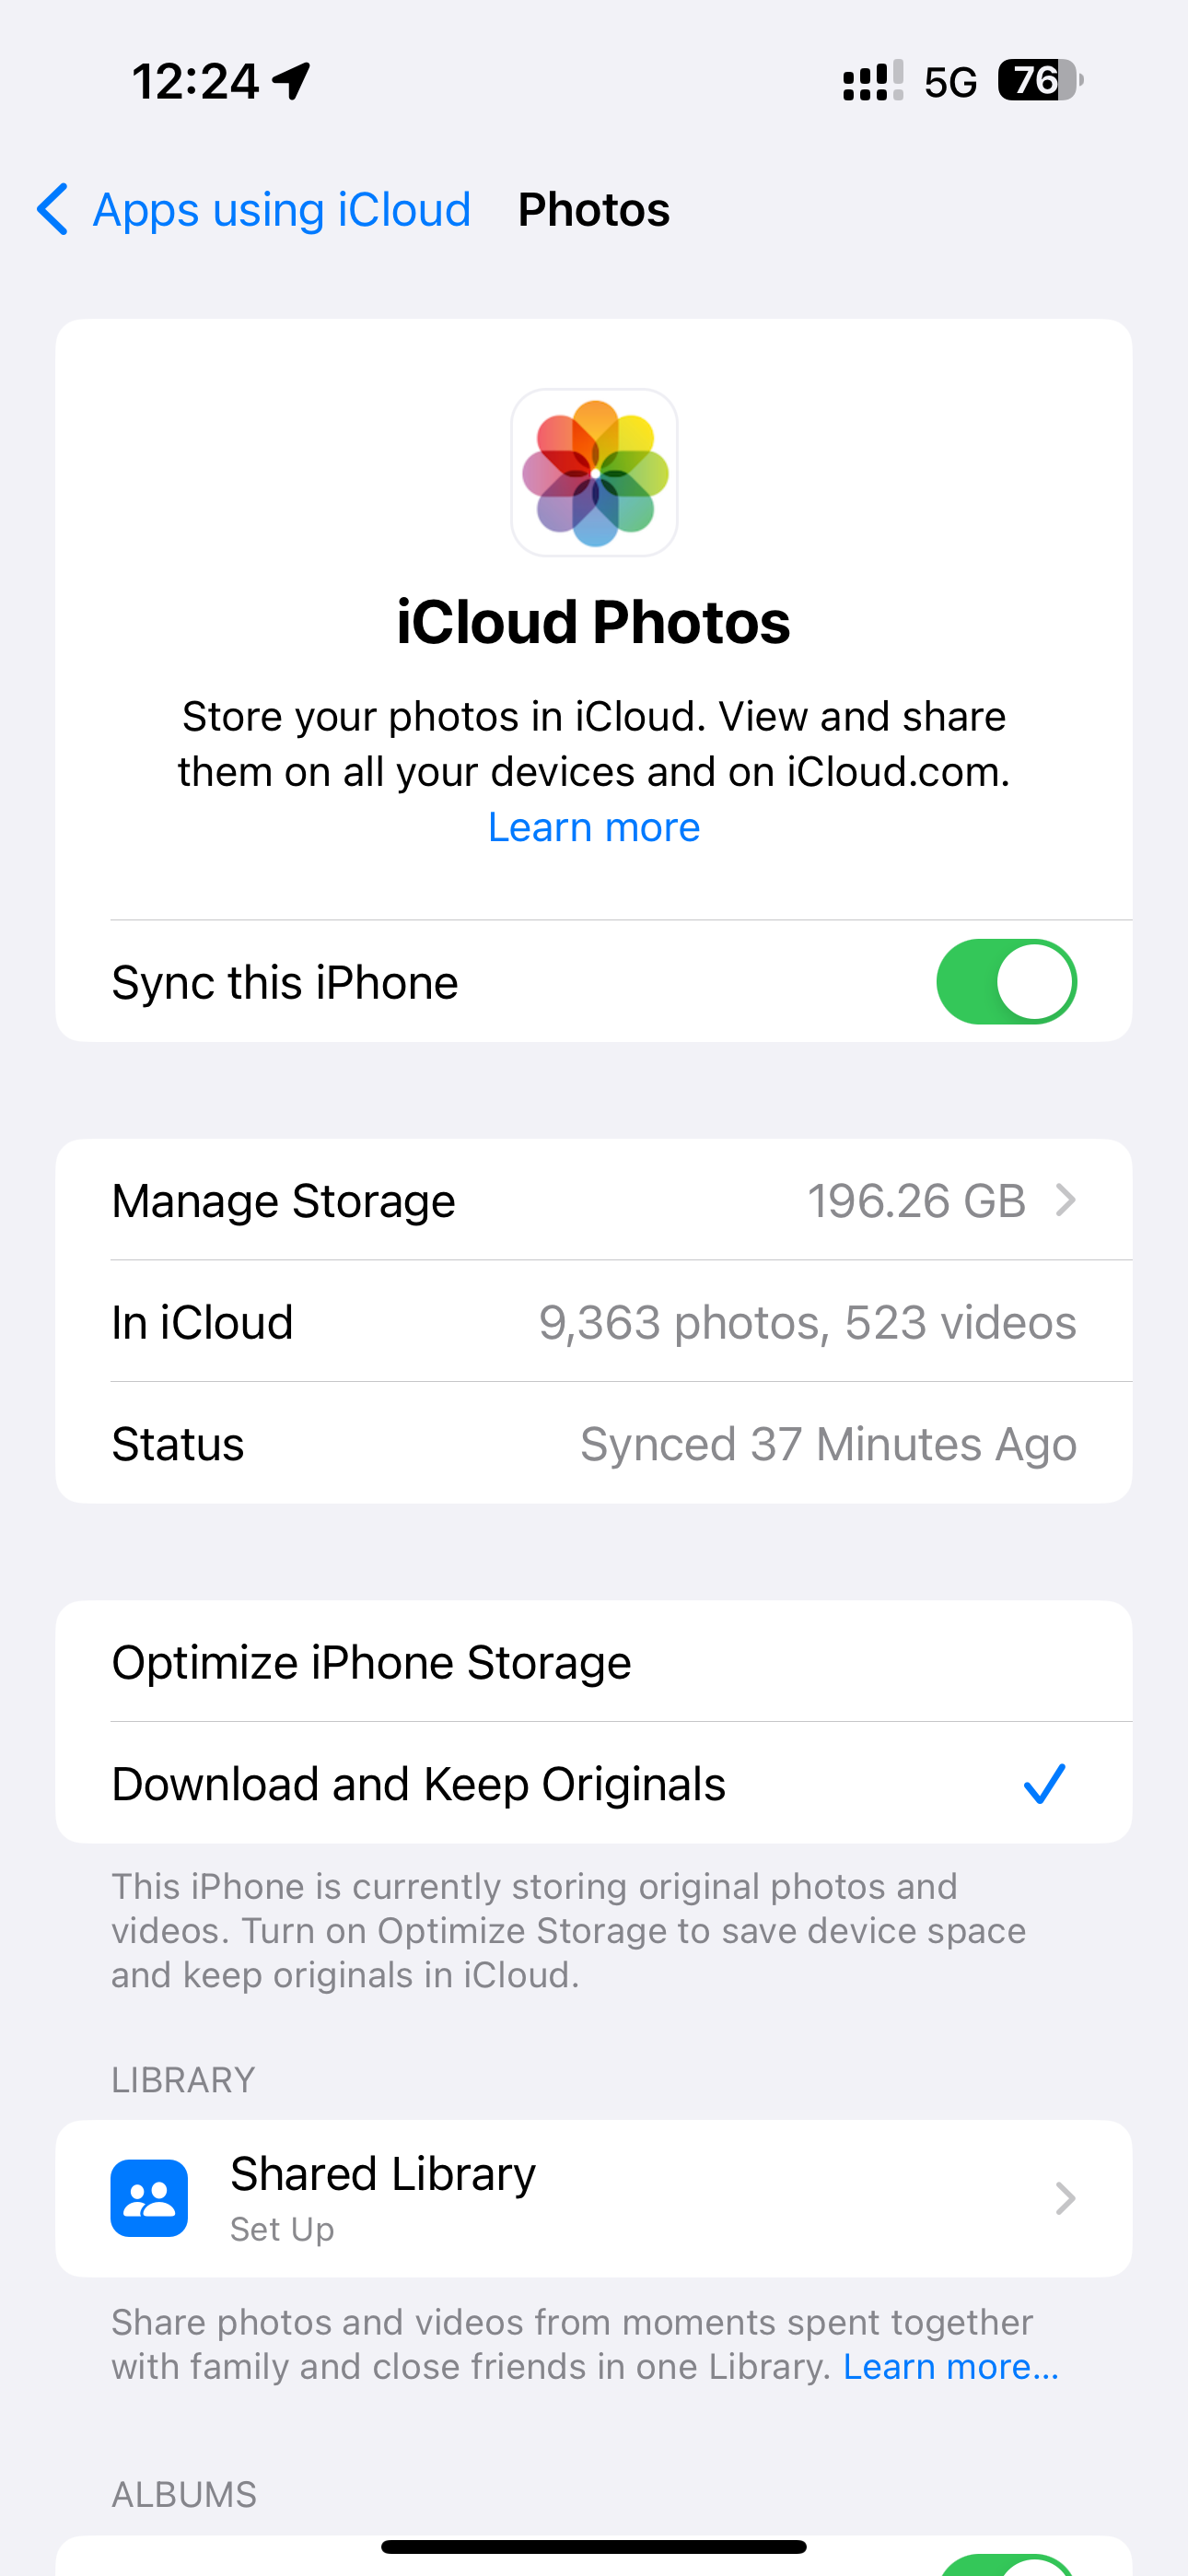 iCloud storage overview for iCloud Photos in the iPhone's Settings app.